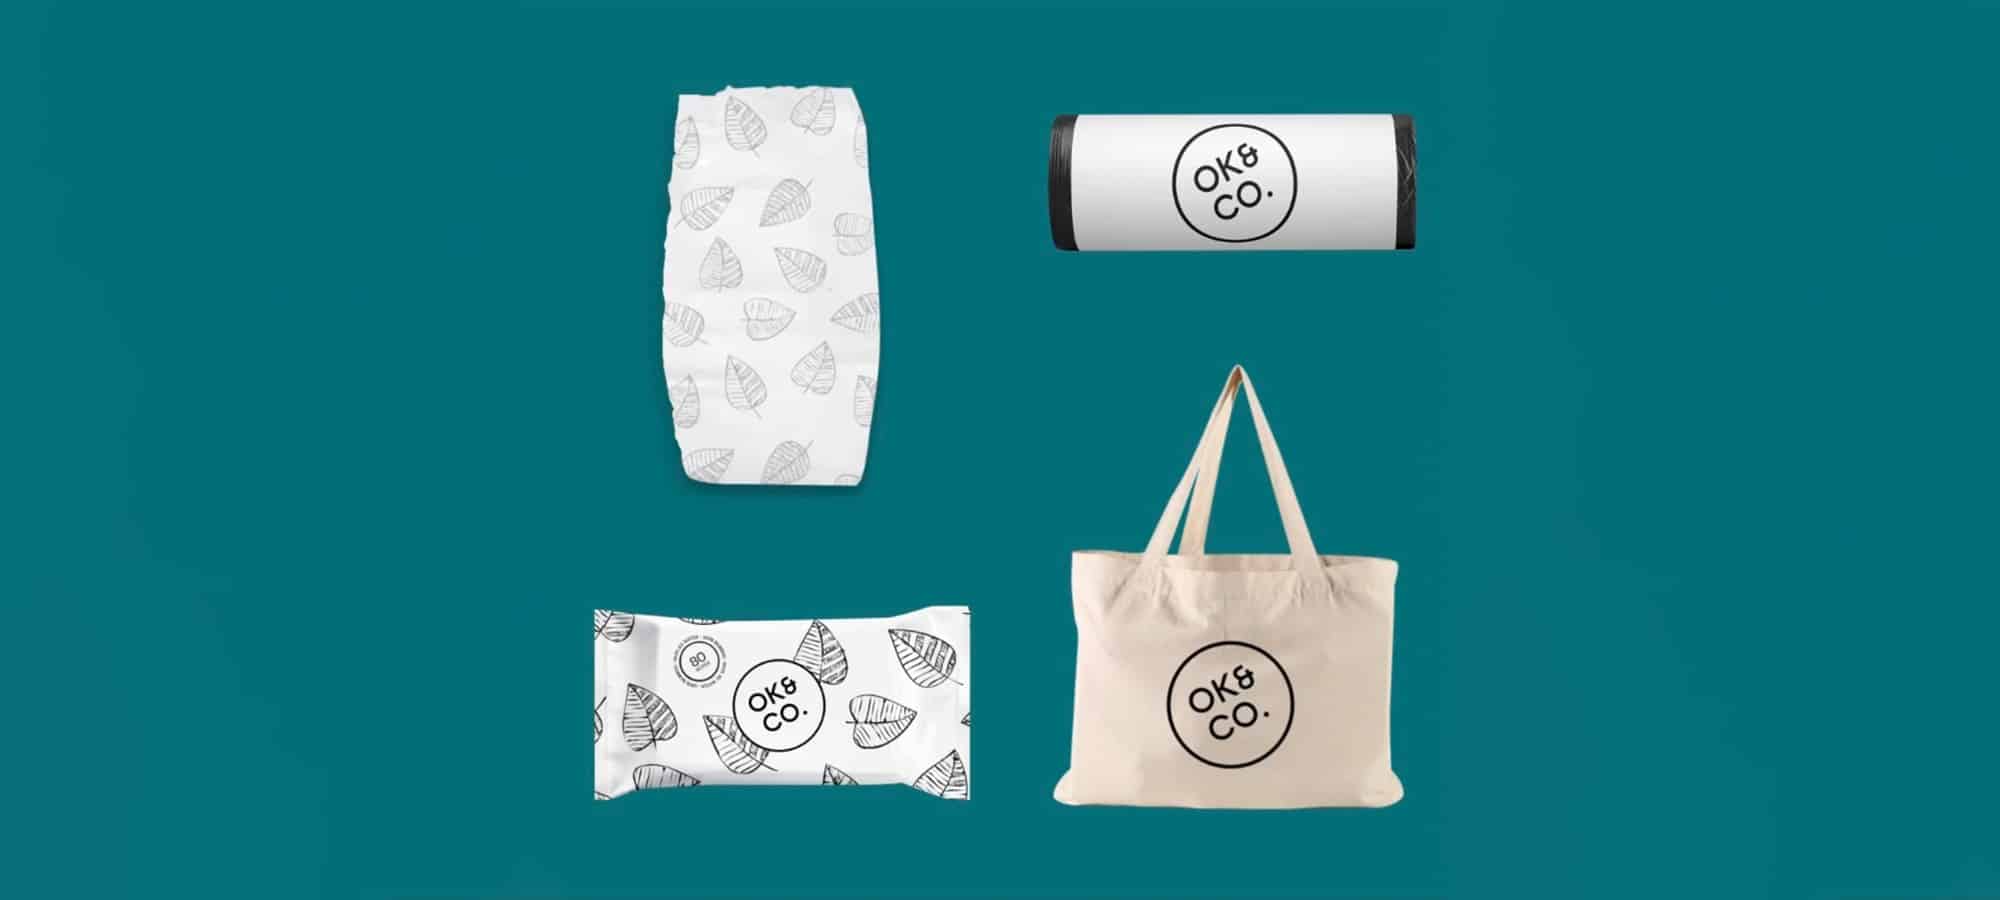 WIN an Eco-Friendlier Nappies & Wipes Box from OK&CO.